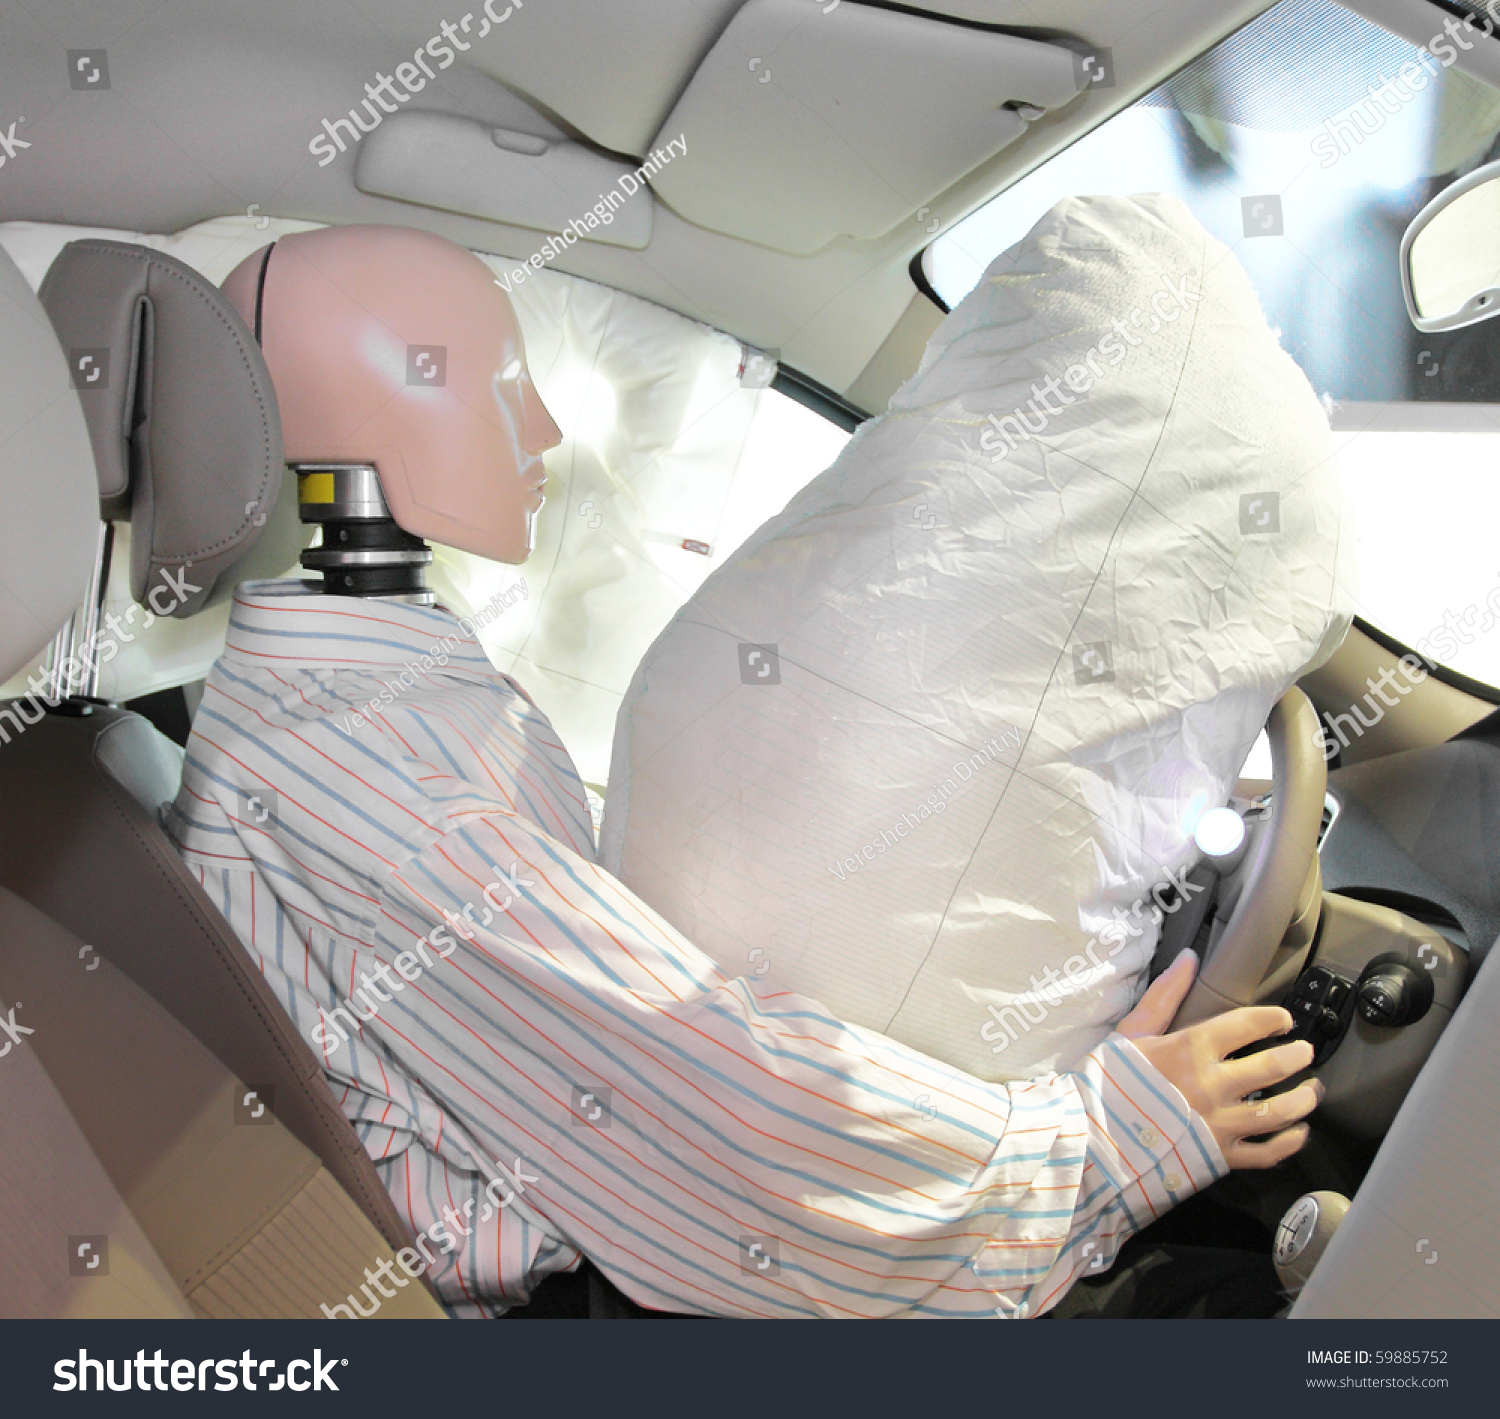 The image of mannequin in a car after crash-test #59885752